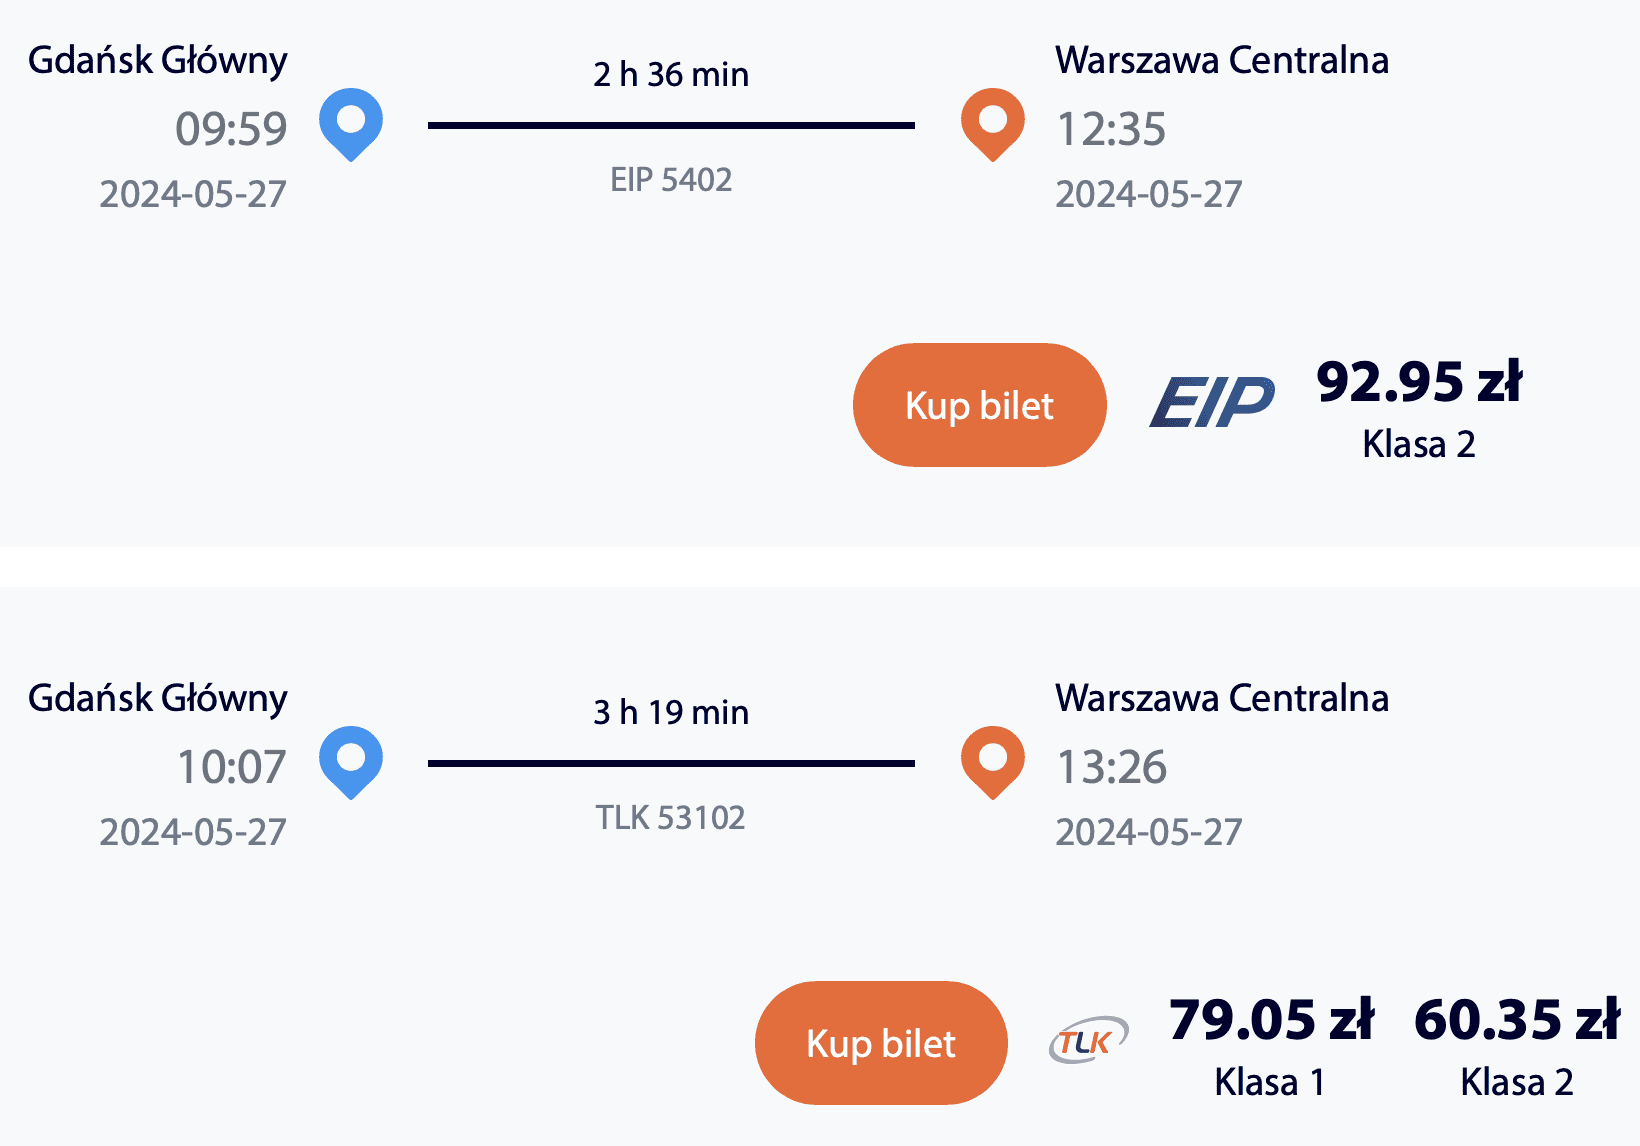 Cheap train ticket options from Gdańsk to Warsaw